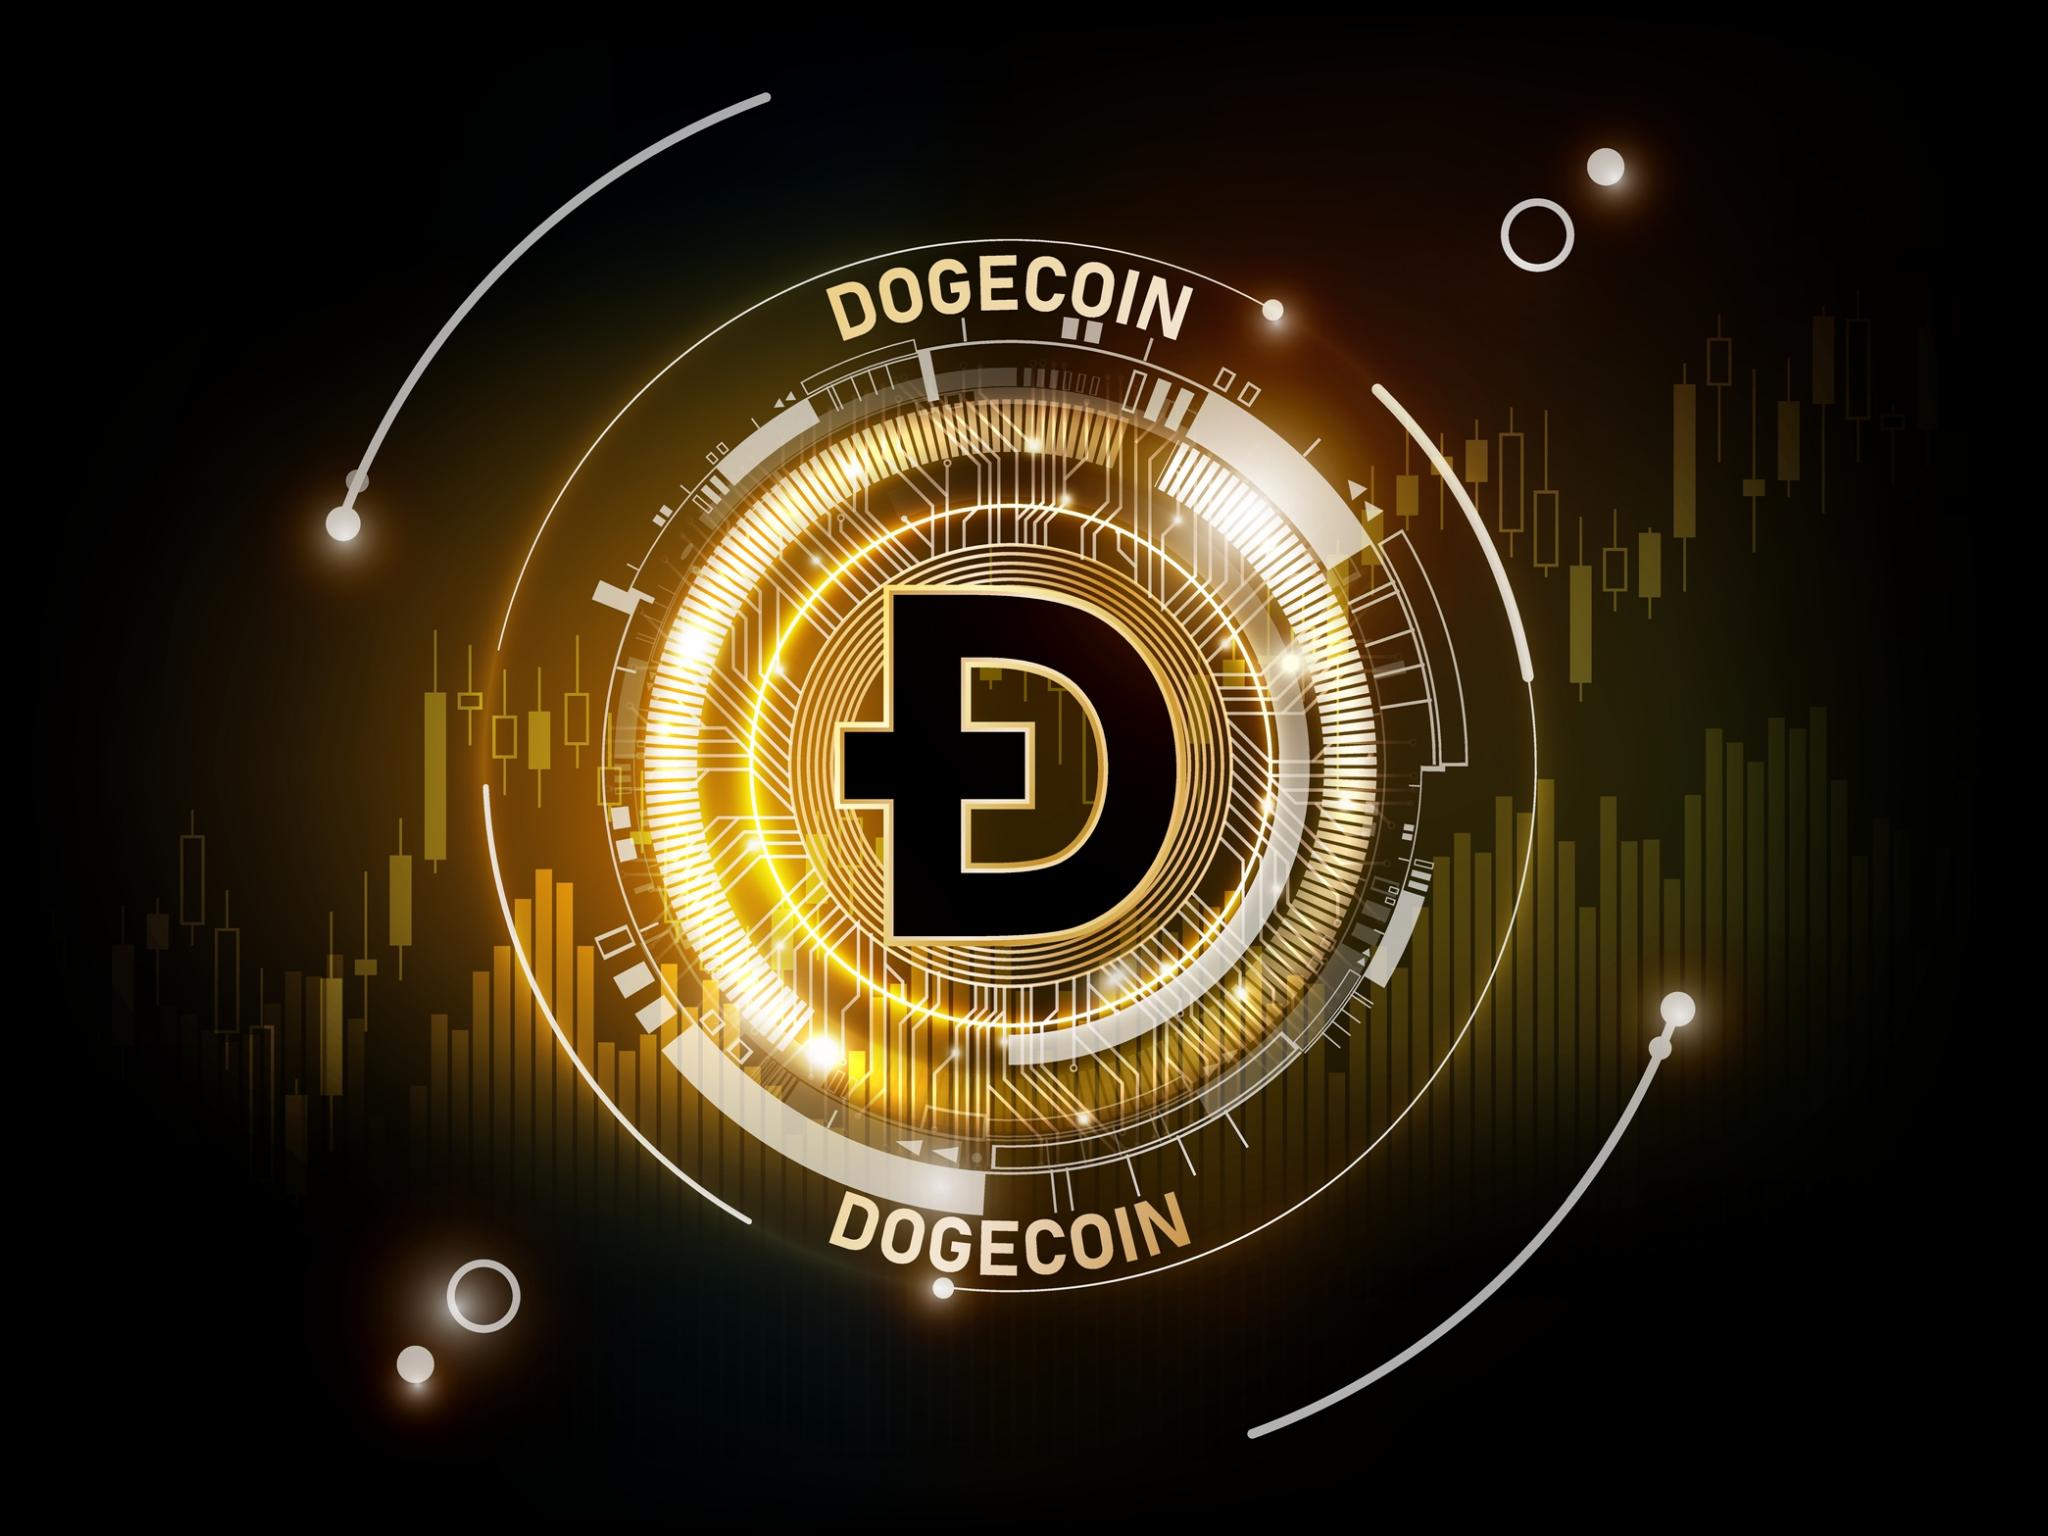  500-rise-for-dogecoin-popular-crypto-trader-says-doge-has-real-shot-of-emulating-what-bitcoin-did-in-2019 